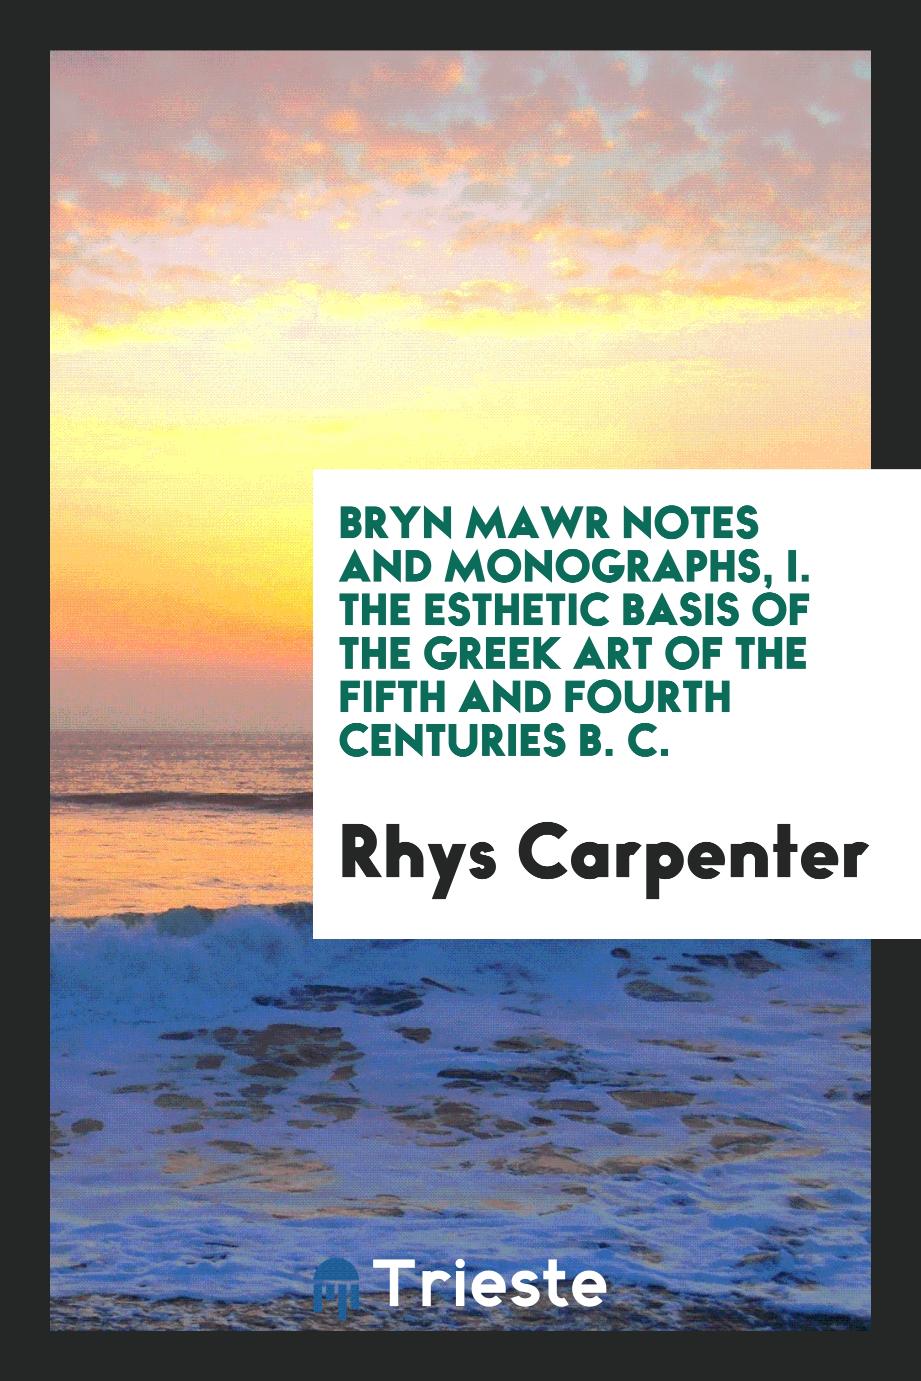 Bryn Mawr Notes and monographs, I. The esthetic basis of the Greek art of the fifth and fourth centuries B. C.